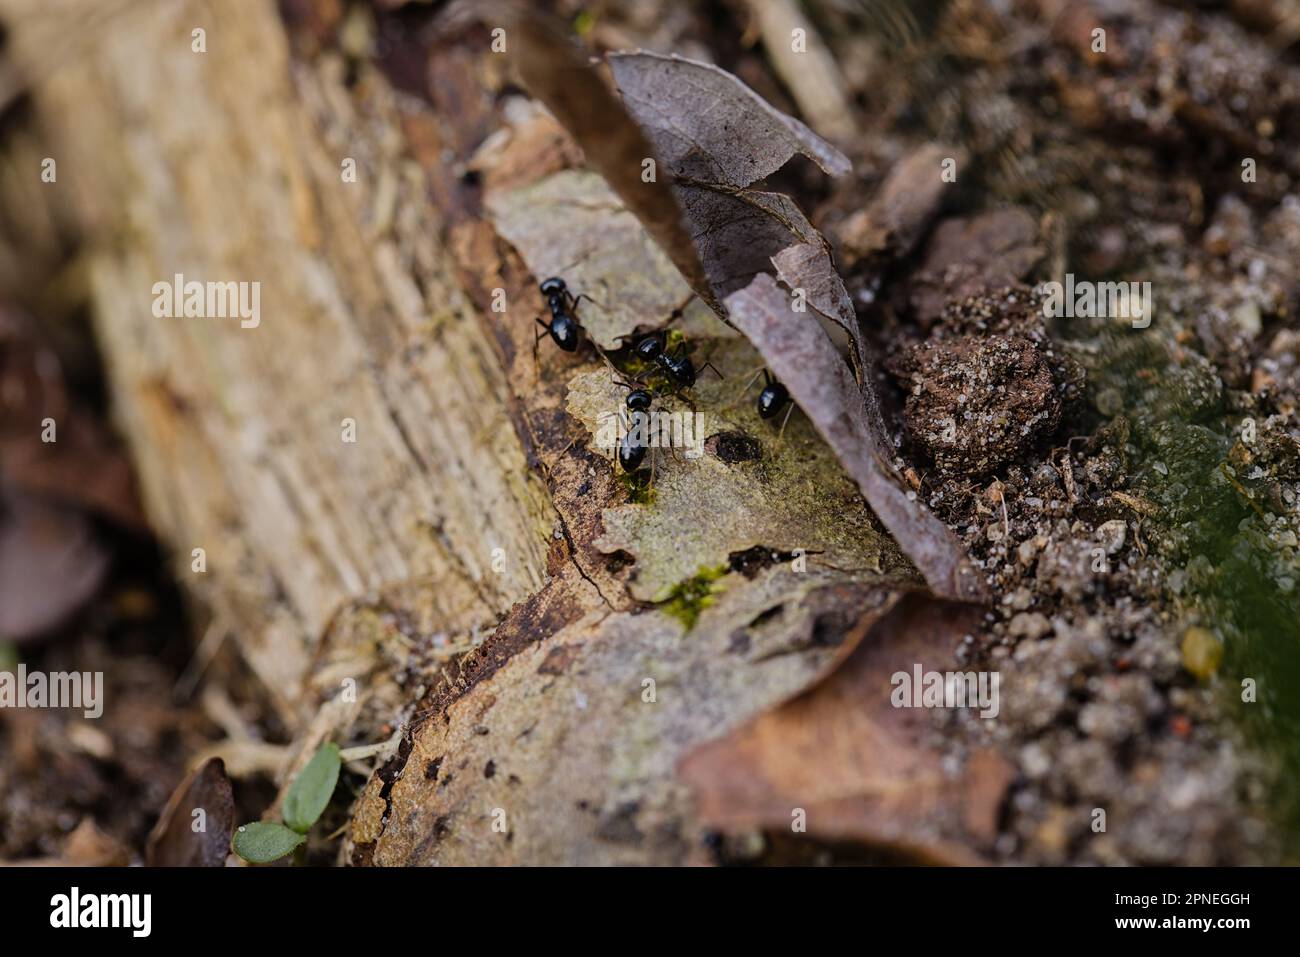 Lots of black ants walking on an old tree trunk in the forest Stock Photo